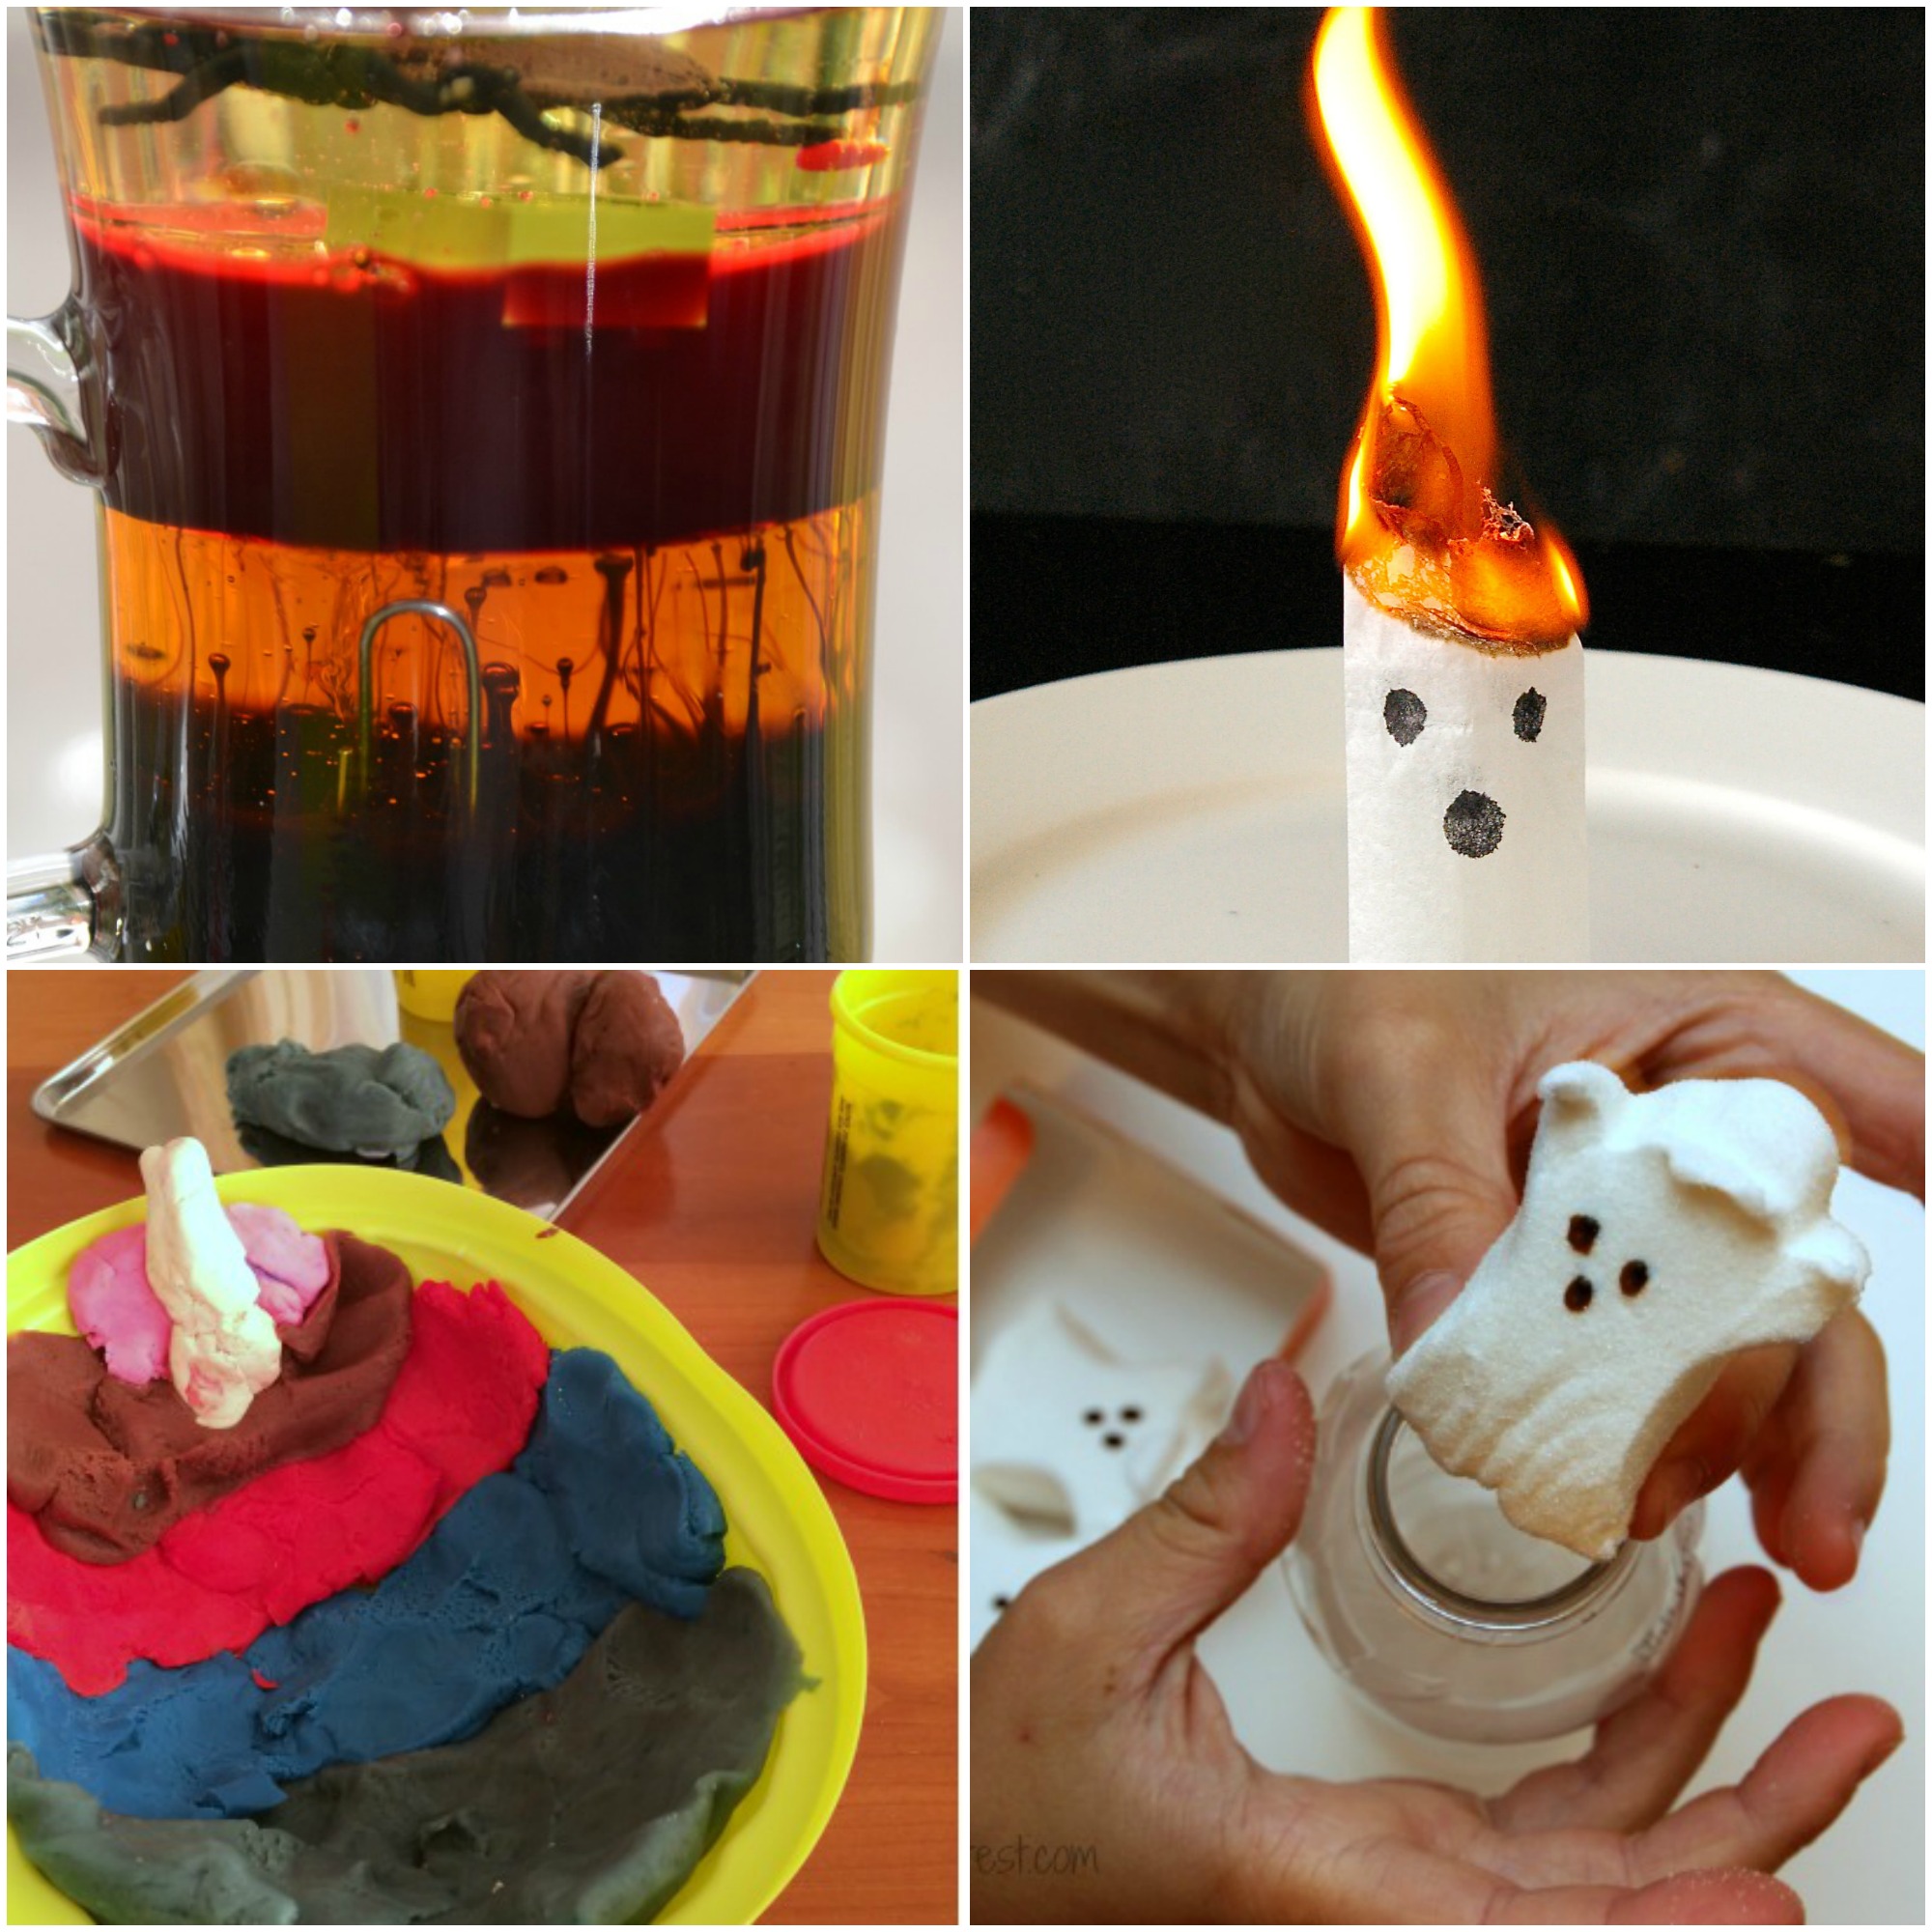 Cooler months are the perfect time to try out new STEM activities! Kids love getting their hands messy and working their little minds as they create and build with this set of fall STEM learning activities.